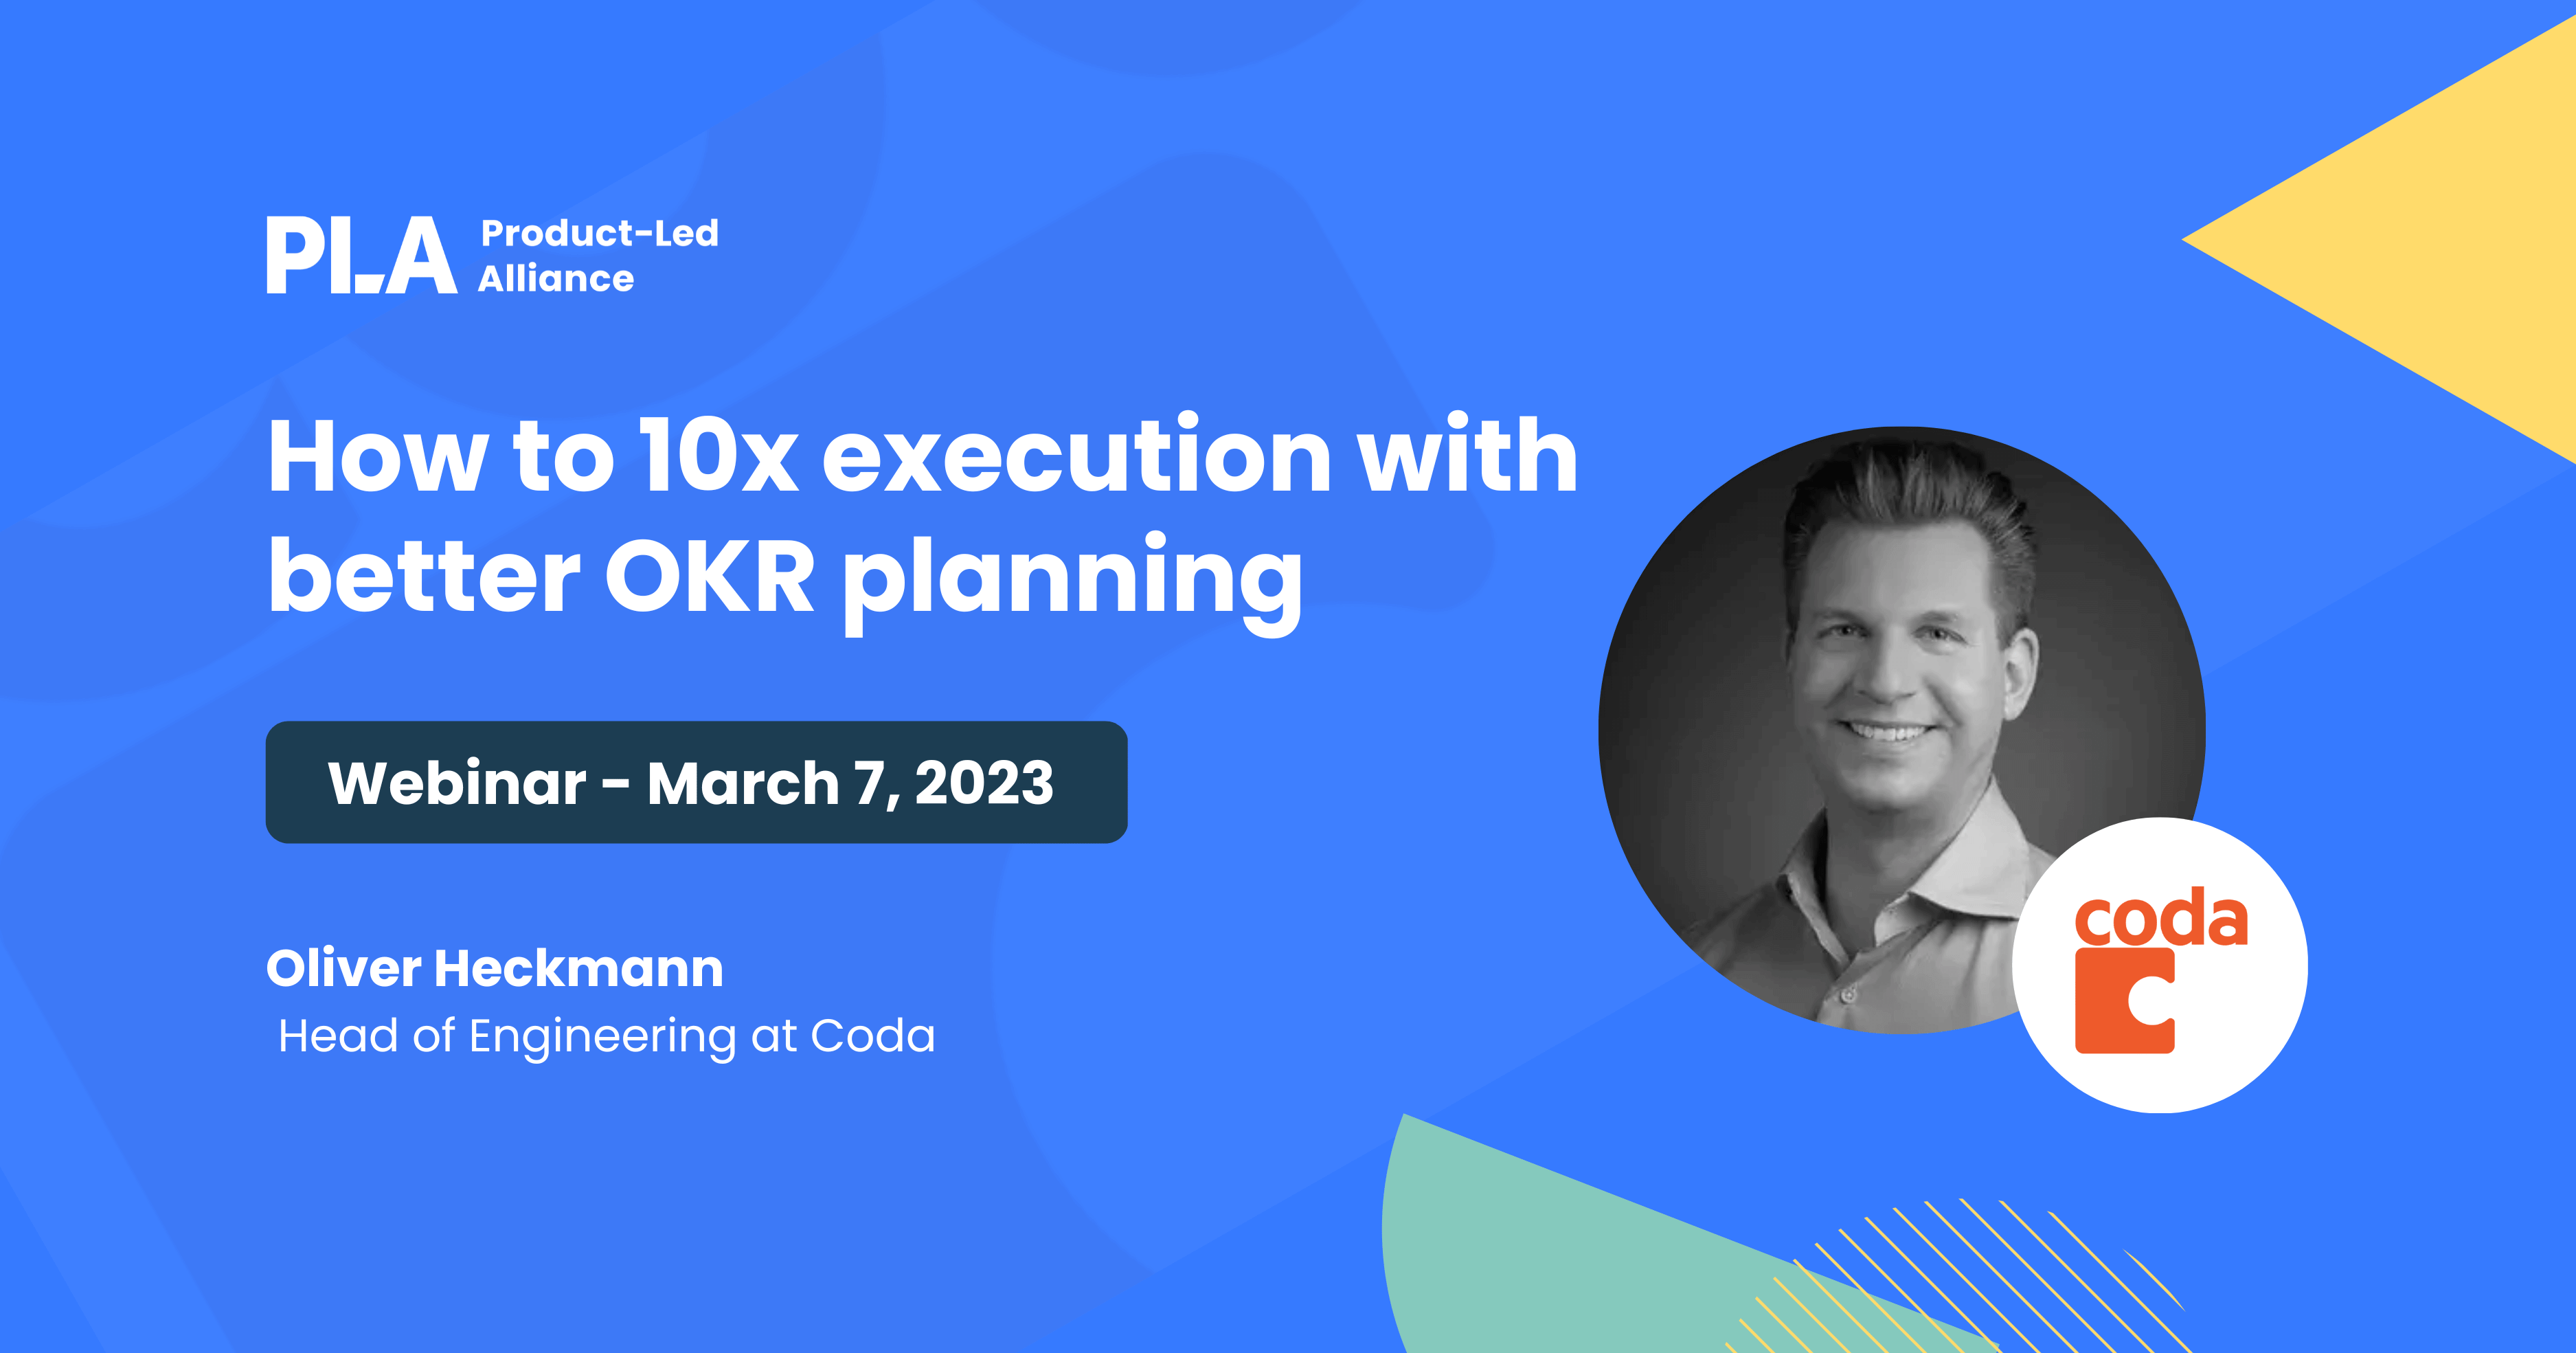 How to 10x execution with better OKR planning - Coda webinar